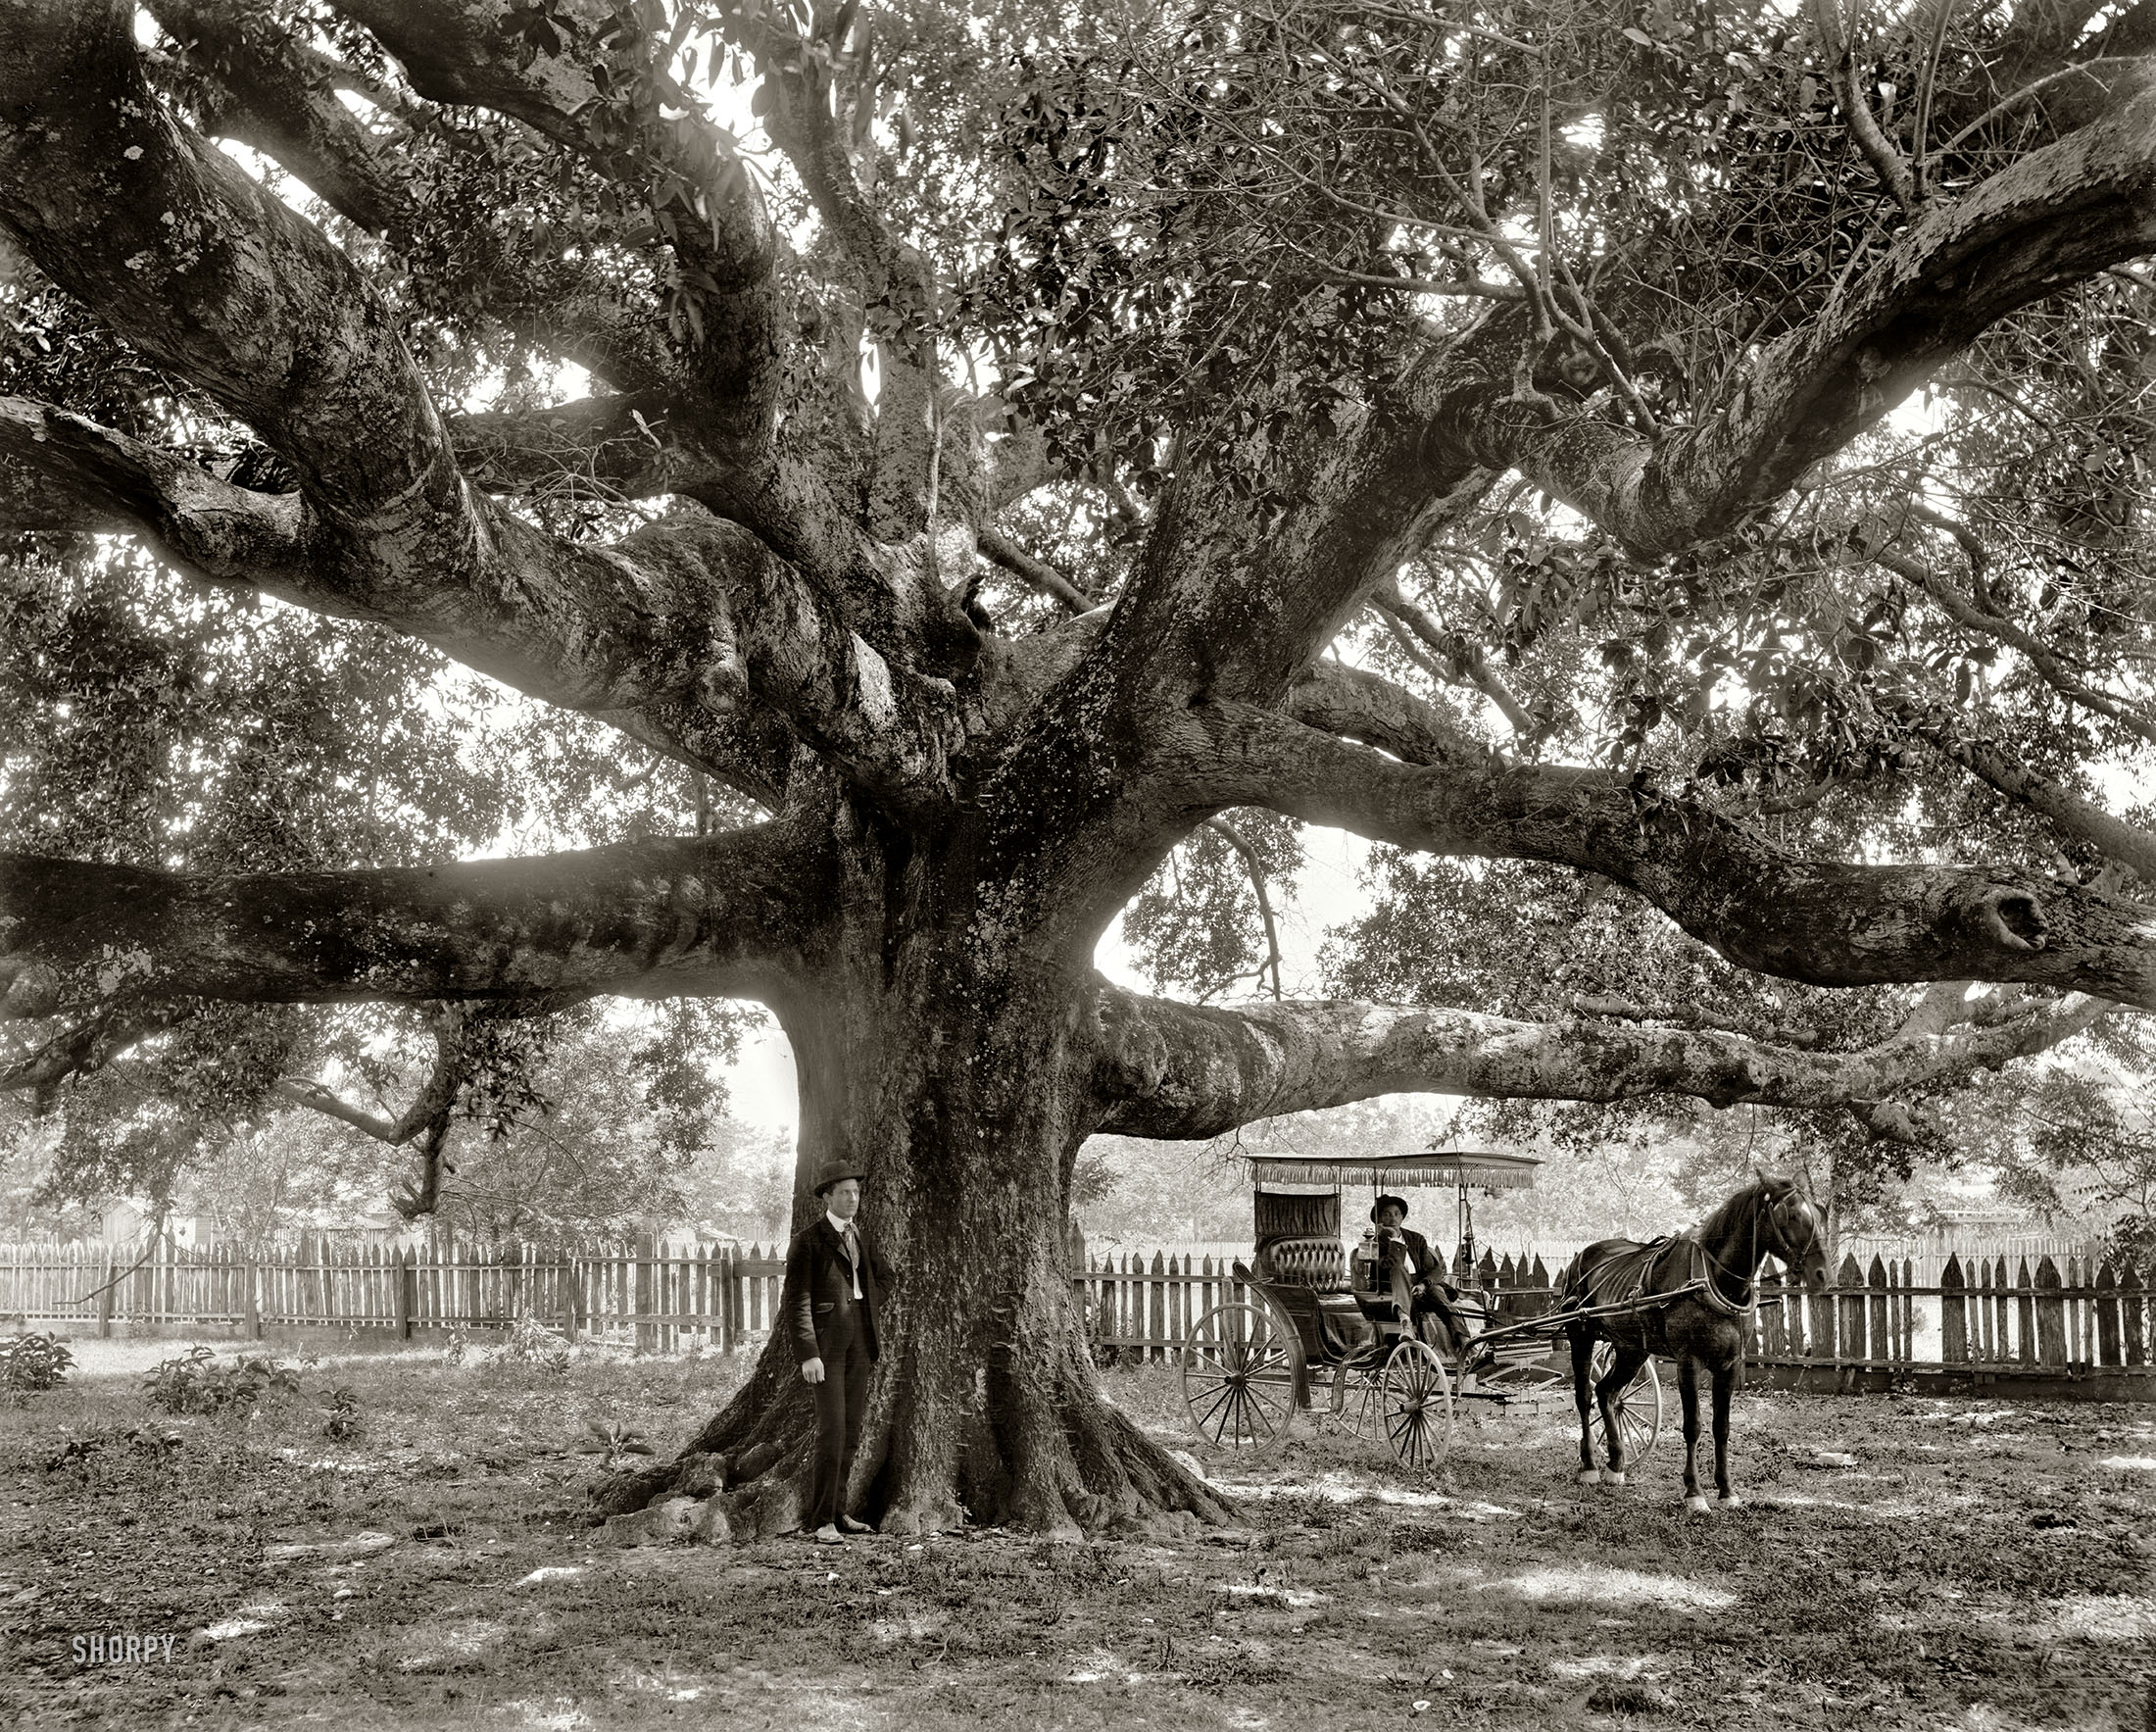 Circa 1900. "The Mammoth Oak at Pass Christian, Mississippi." Plus a surrey with the fringe on top. 8x10 glass negative, Detroit Publishing Co. View full size.